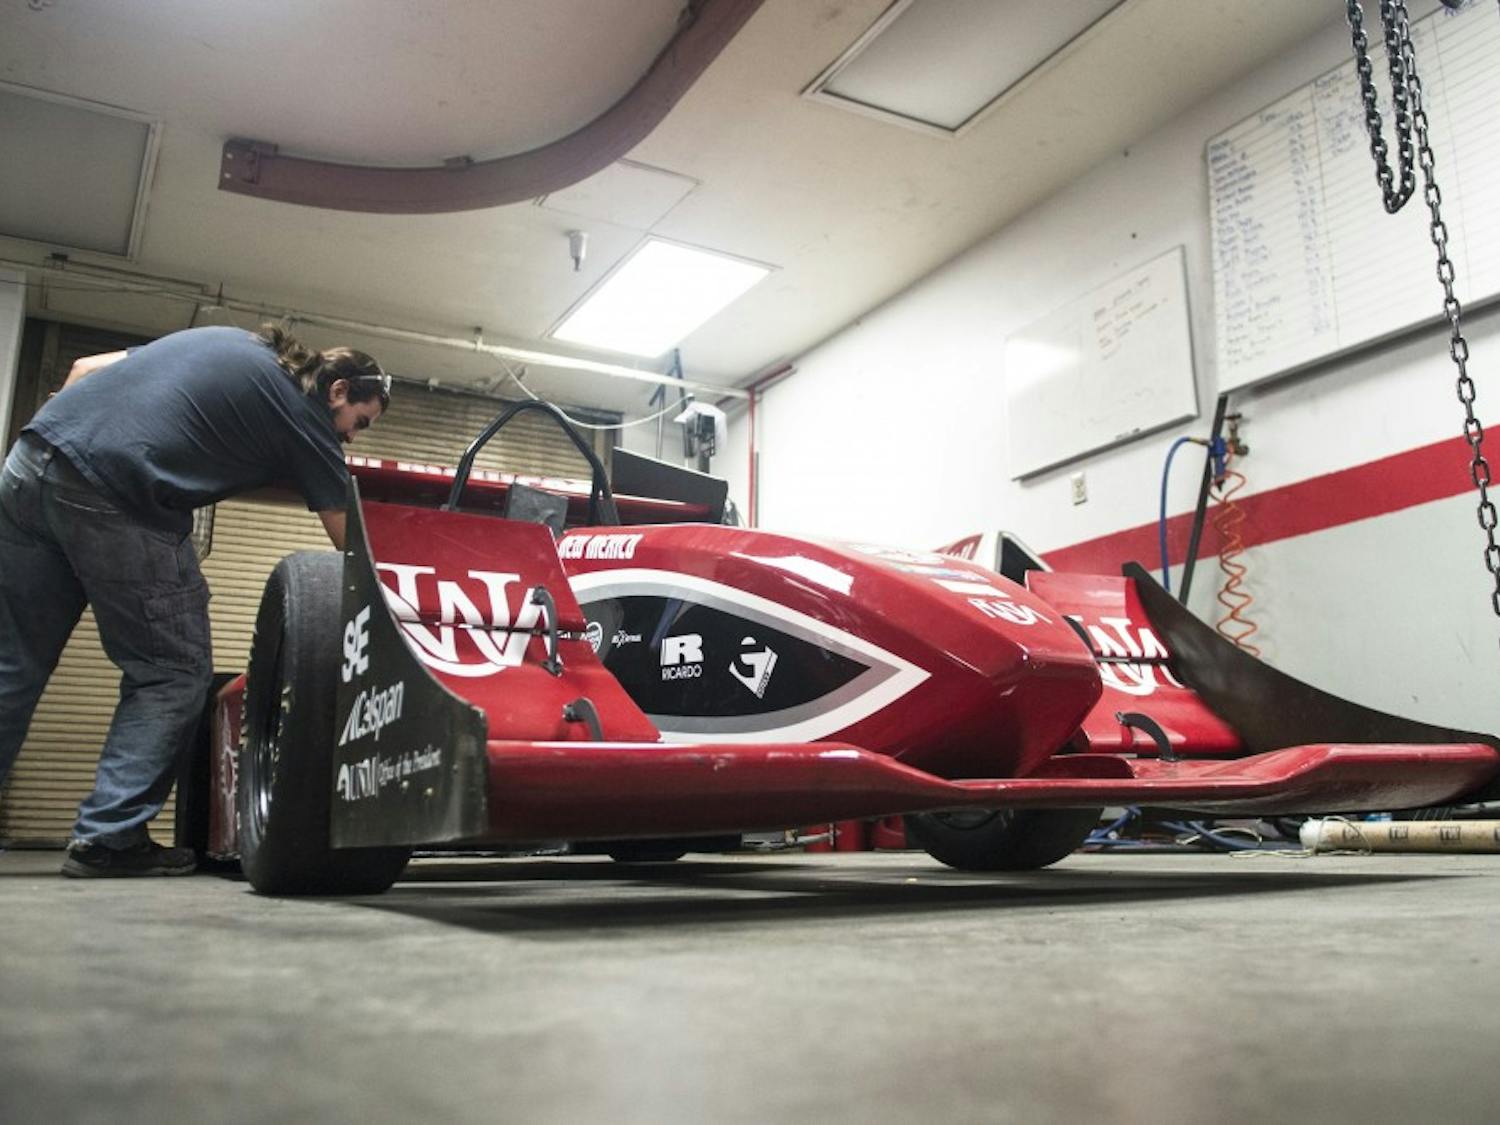 Estevan Pina, a senior mechanical engineering student, reaches into UNM’s Formula SAE motorsports program 2014 car on Nov. 14. The program has been ranked No. 5 in the country and No. 18 in the world, according to a poll issued by the Formula Student Combustion World Rankings.